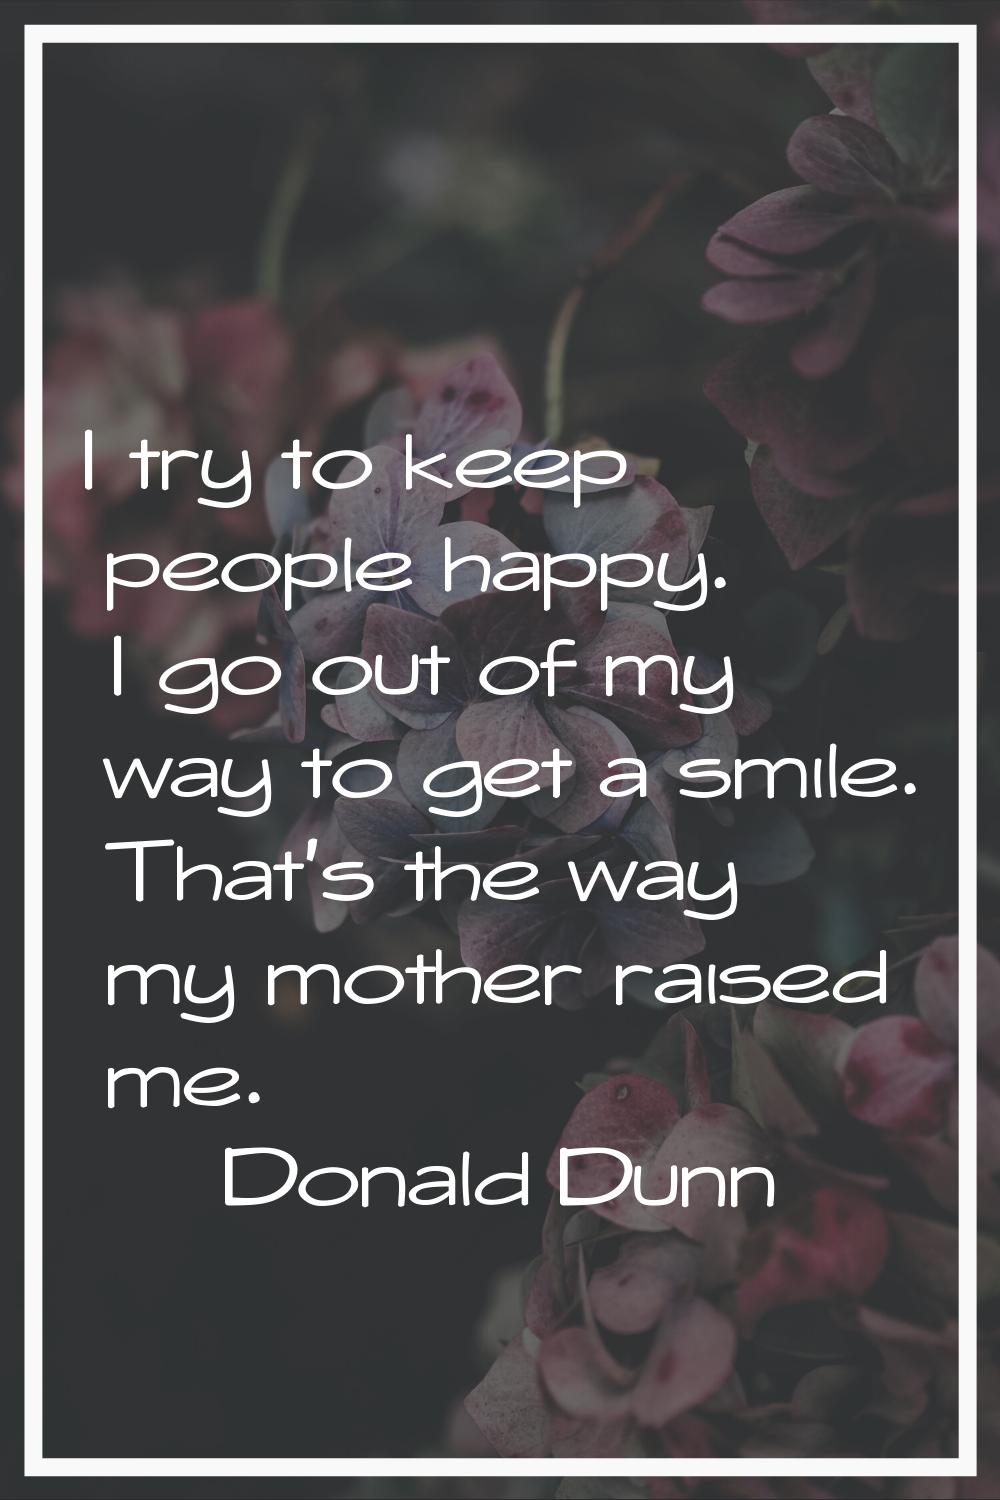 I try to keep people happy. I go out of my way to get a smile. That's the way my mother raised me.